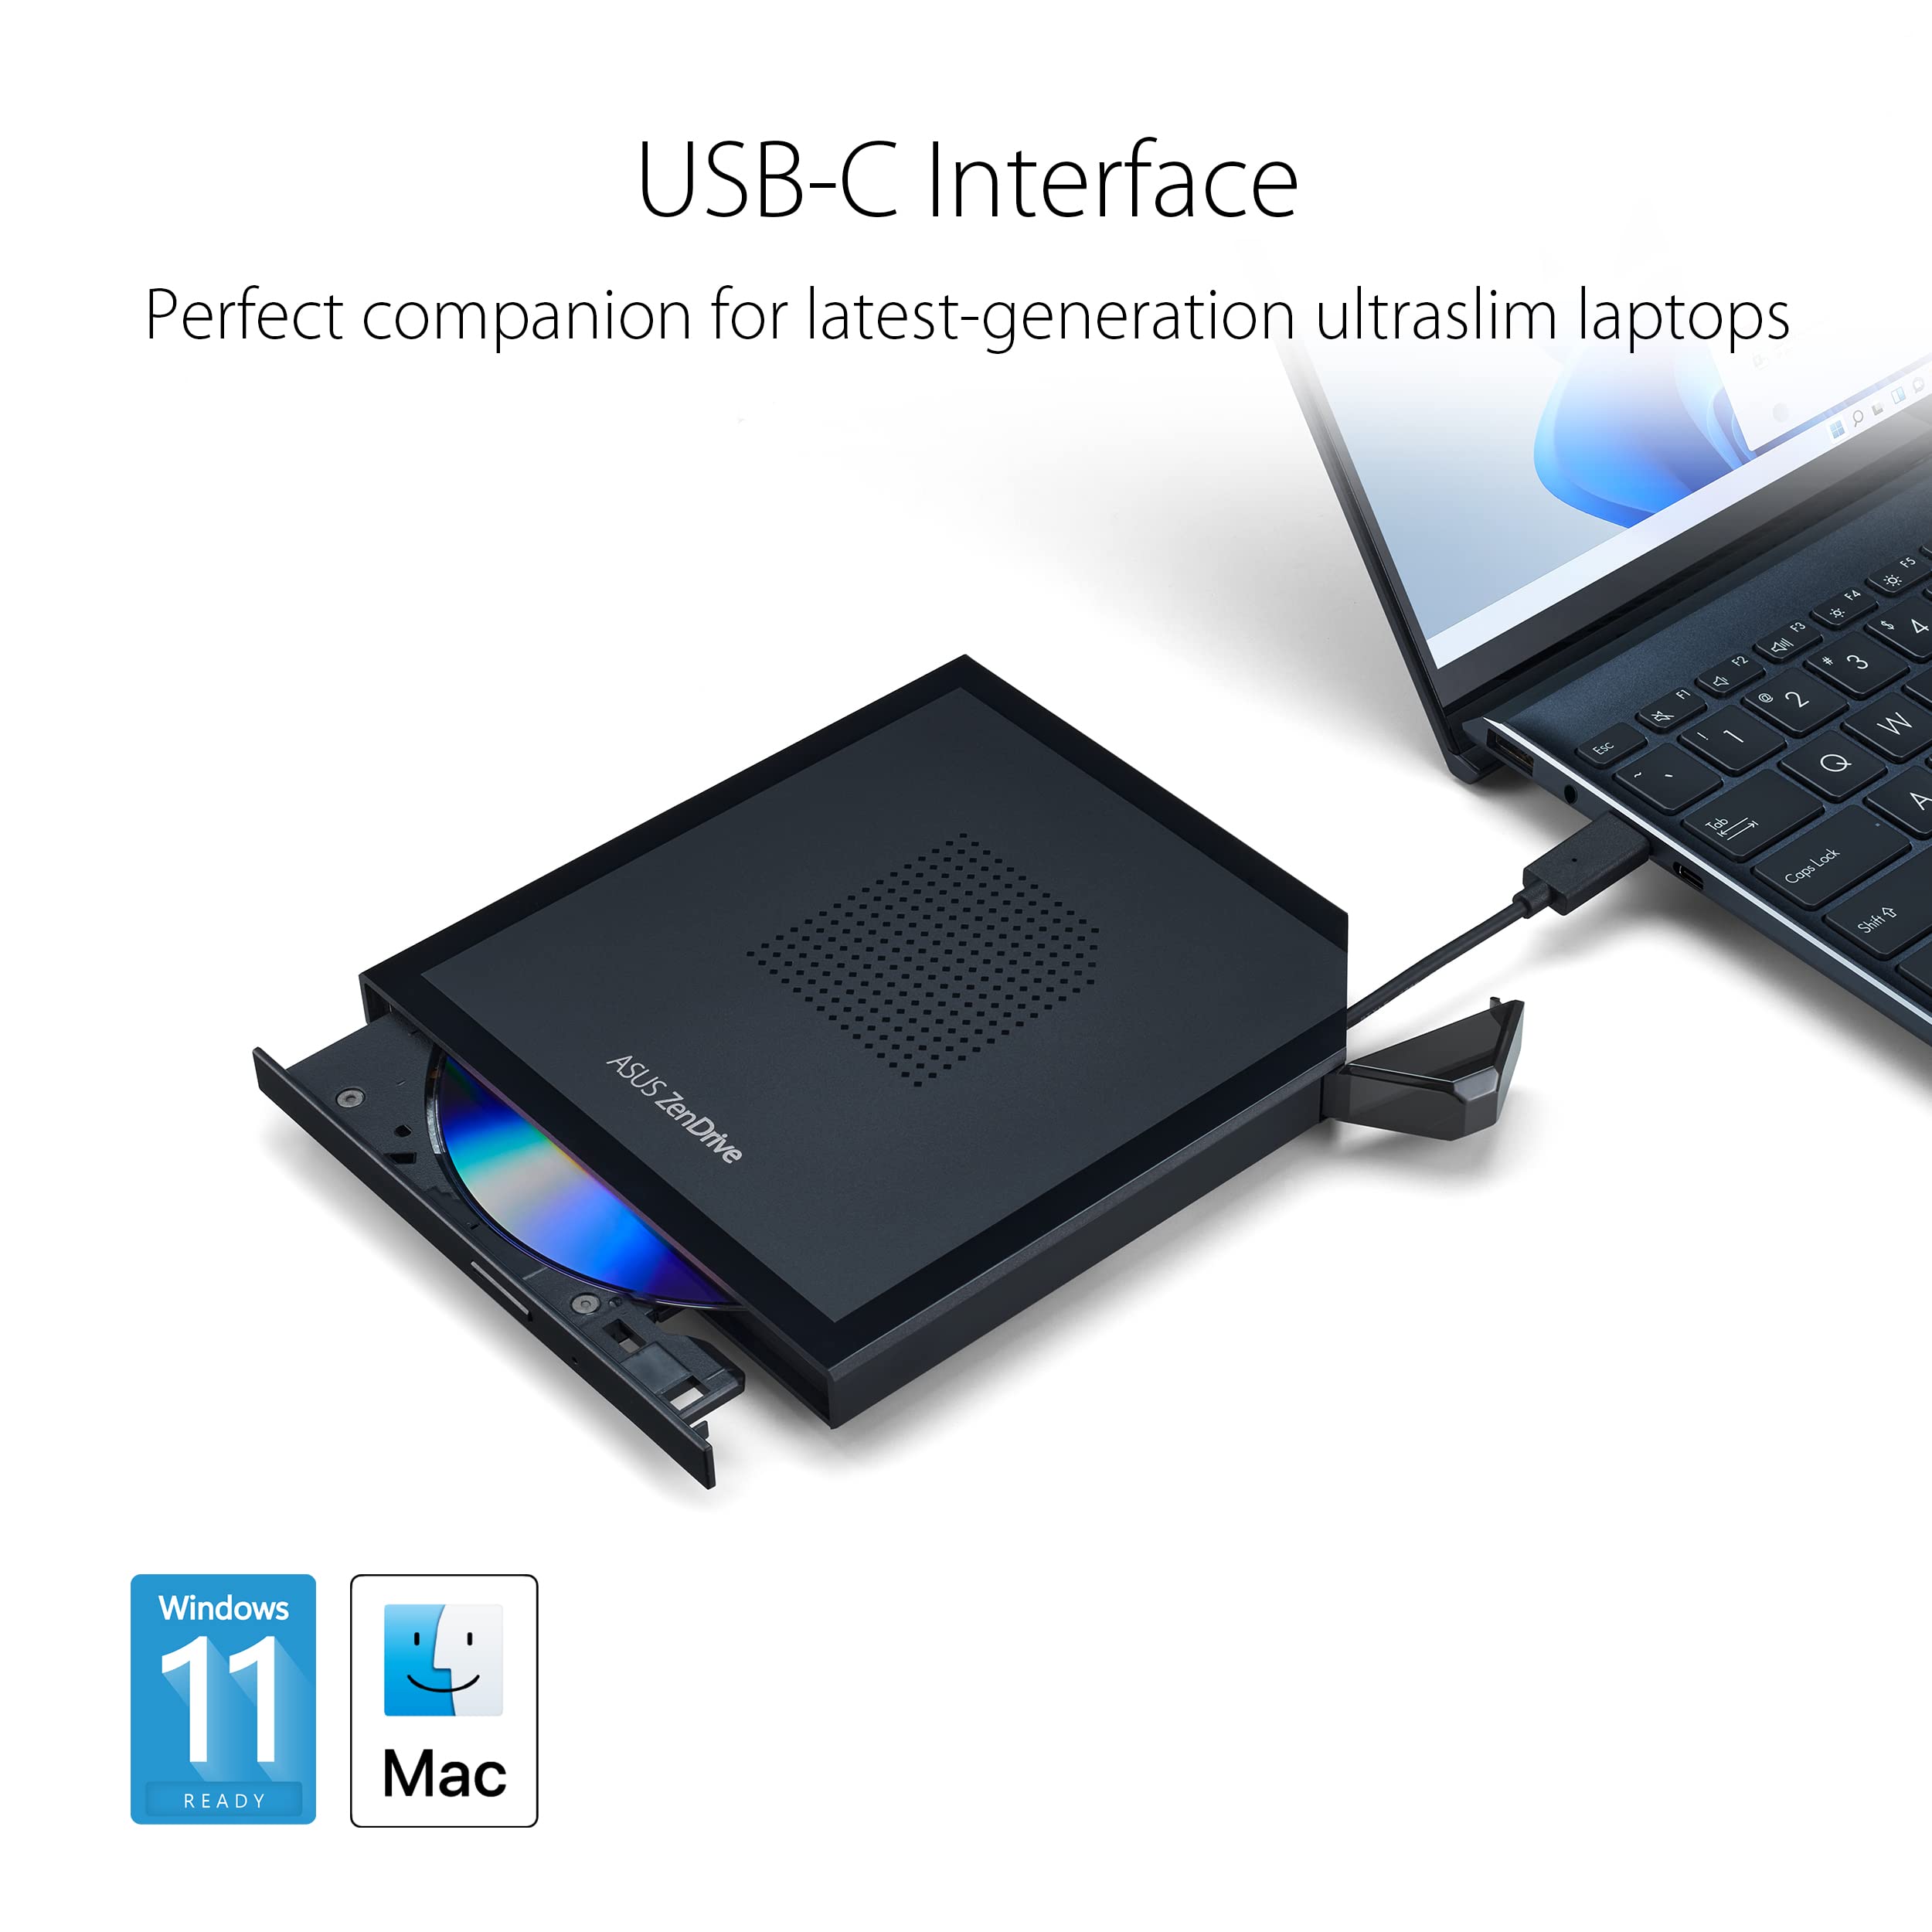 ASUS ZenDrive V1M External DVD Drive and Writer with Built-in Cable-Storage Design, USB-C Interface, Compatible with Win 11 and macOS, M-DISC Support (SDRW-08V1M-U)